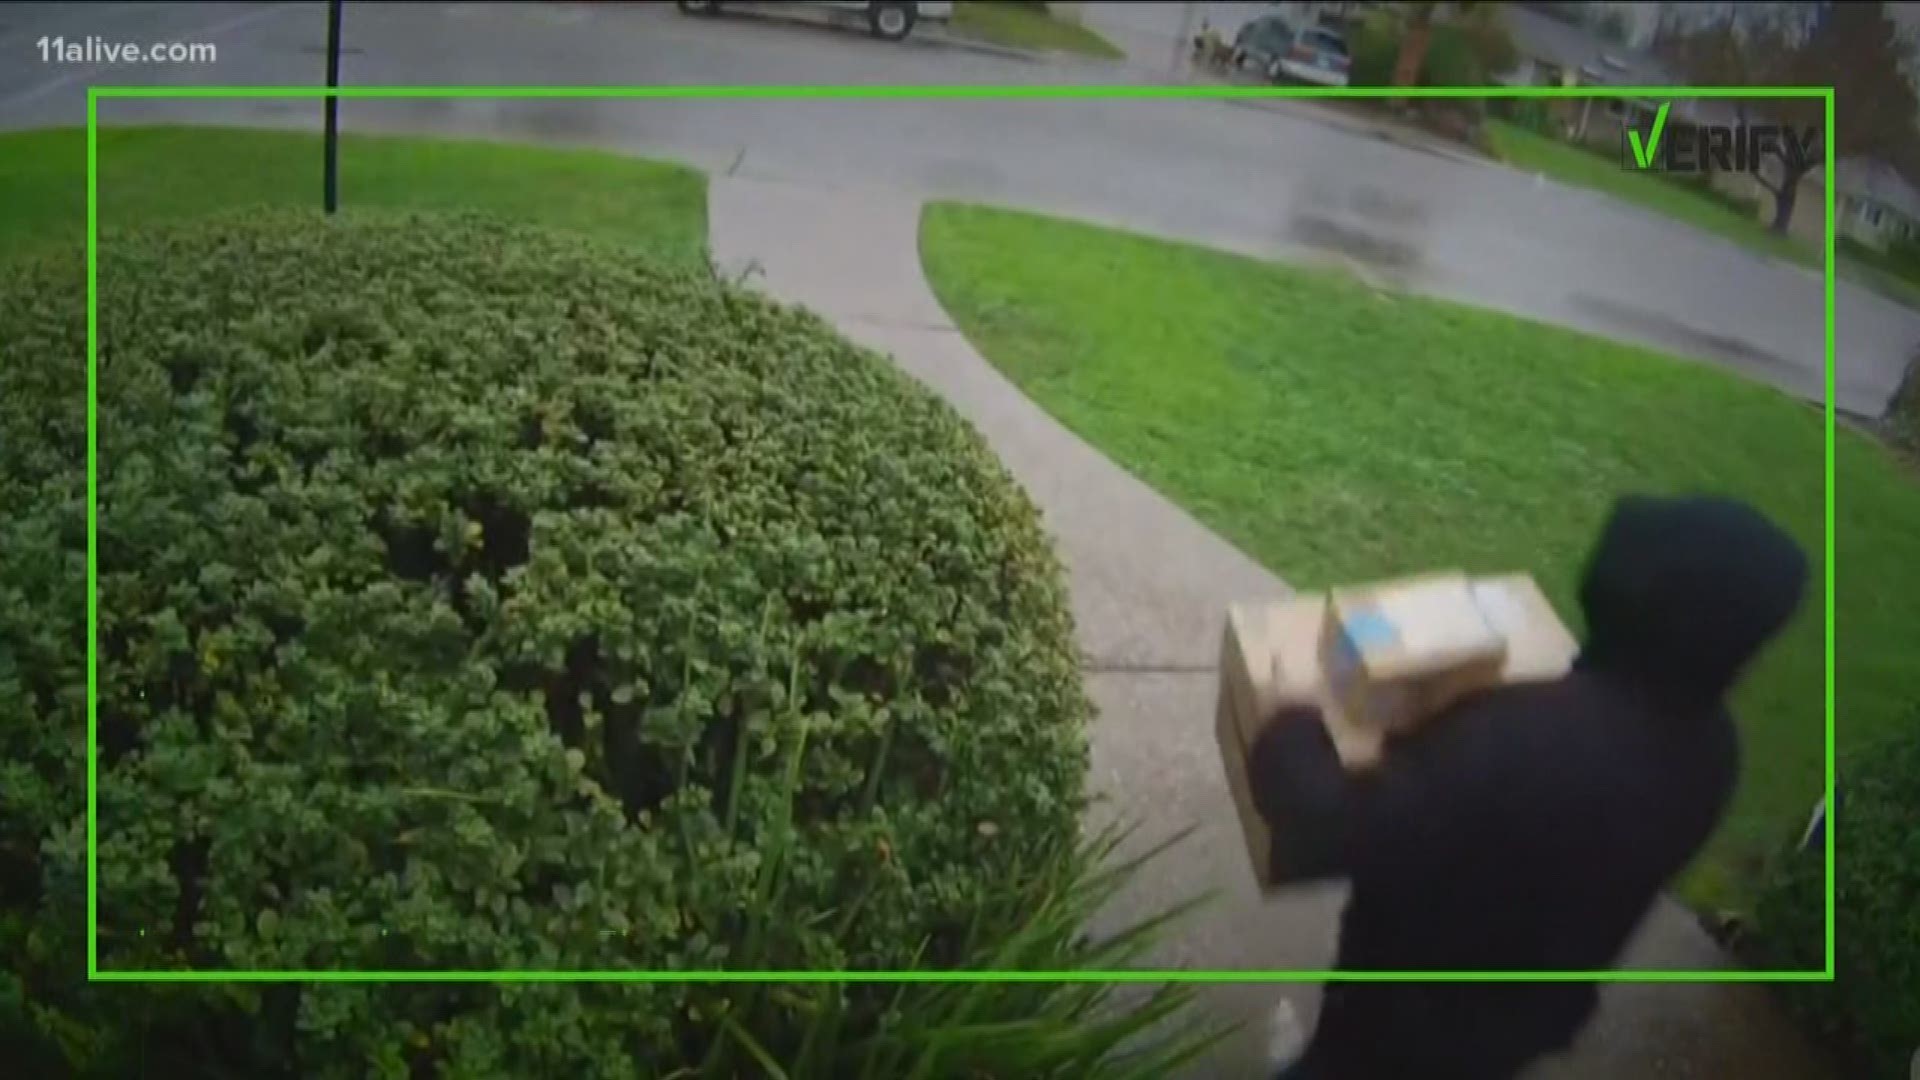 Mail theft is already a felony, so what gives? 11Alive's Liza Lucas explains.